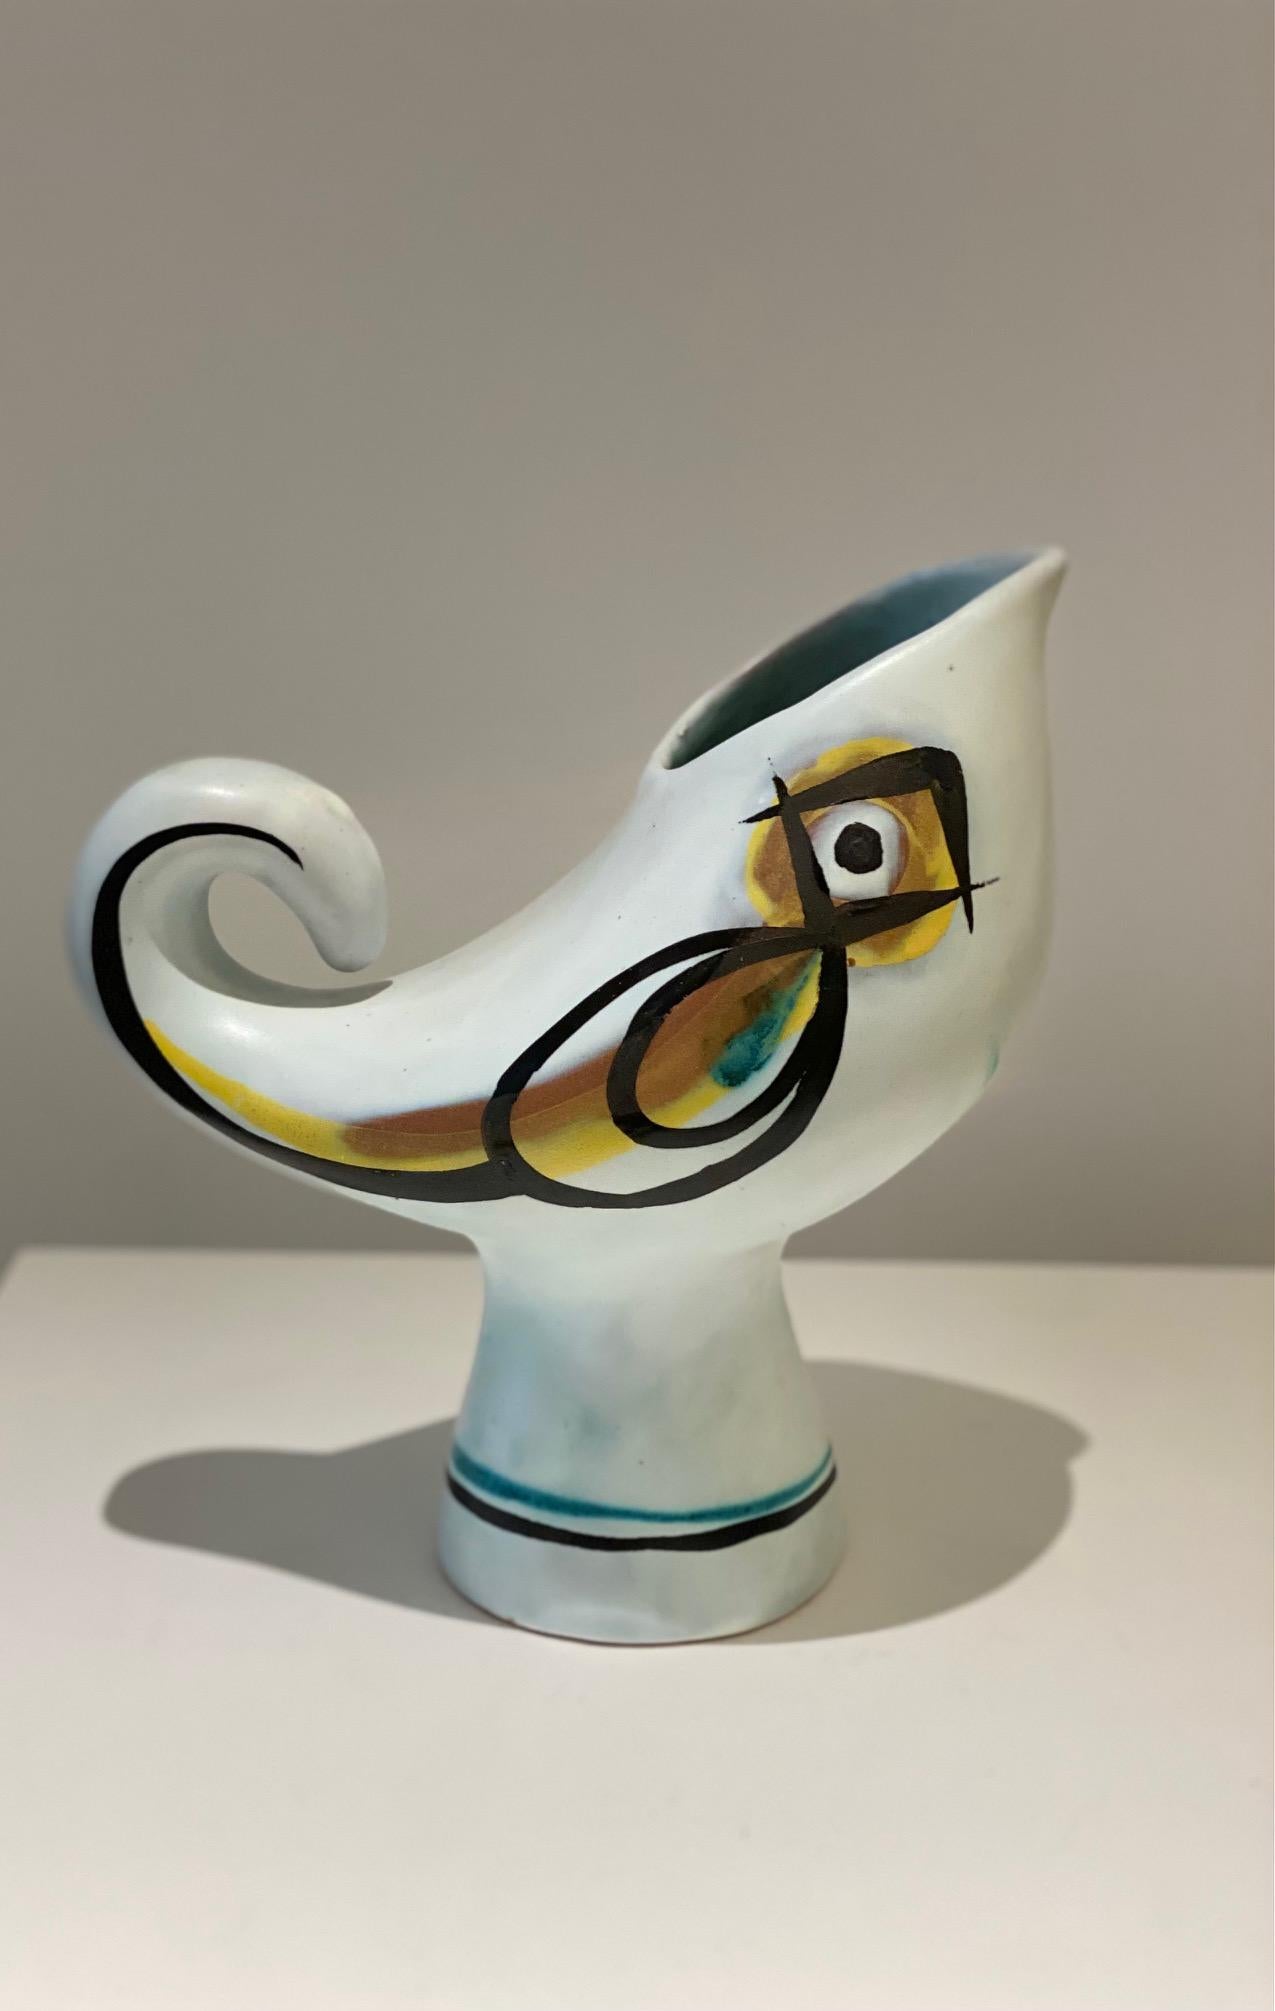 Mid-20th Century Ceramic Bird Pitcher Vase Signed by Roger Capron, Vallauris, 1950s For Sale